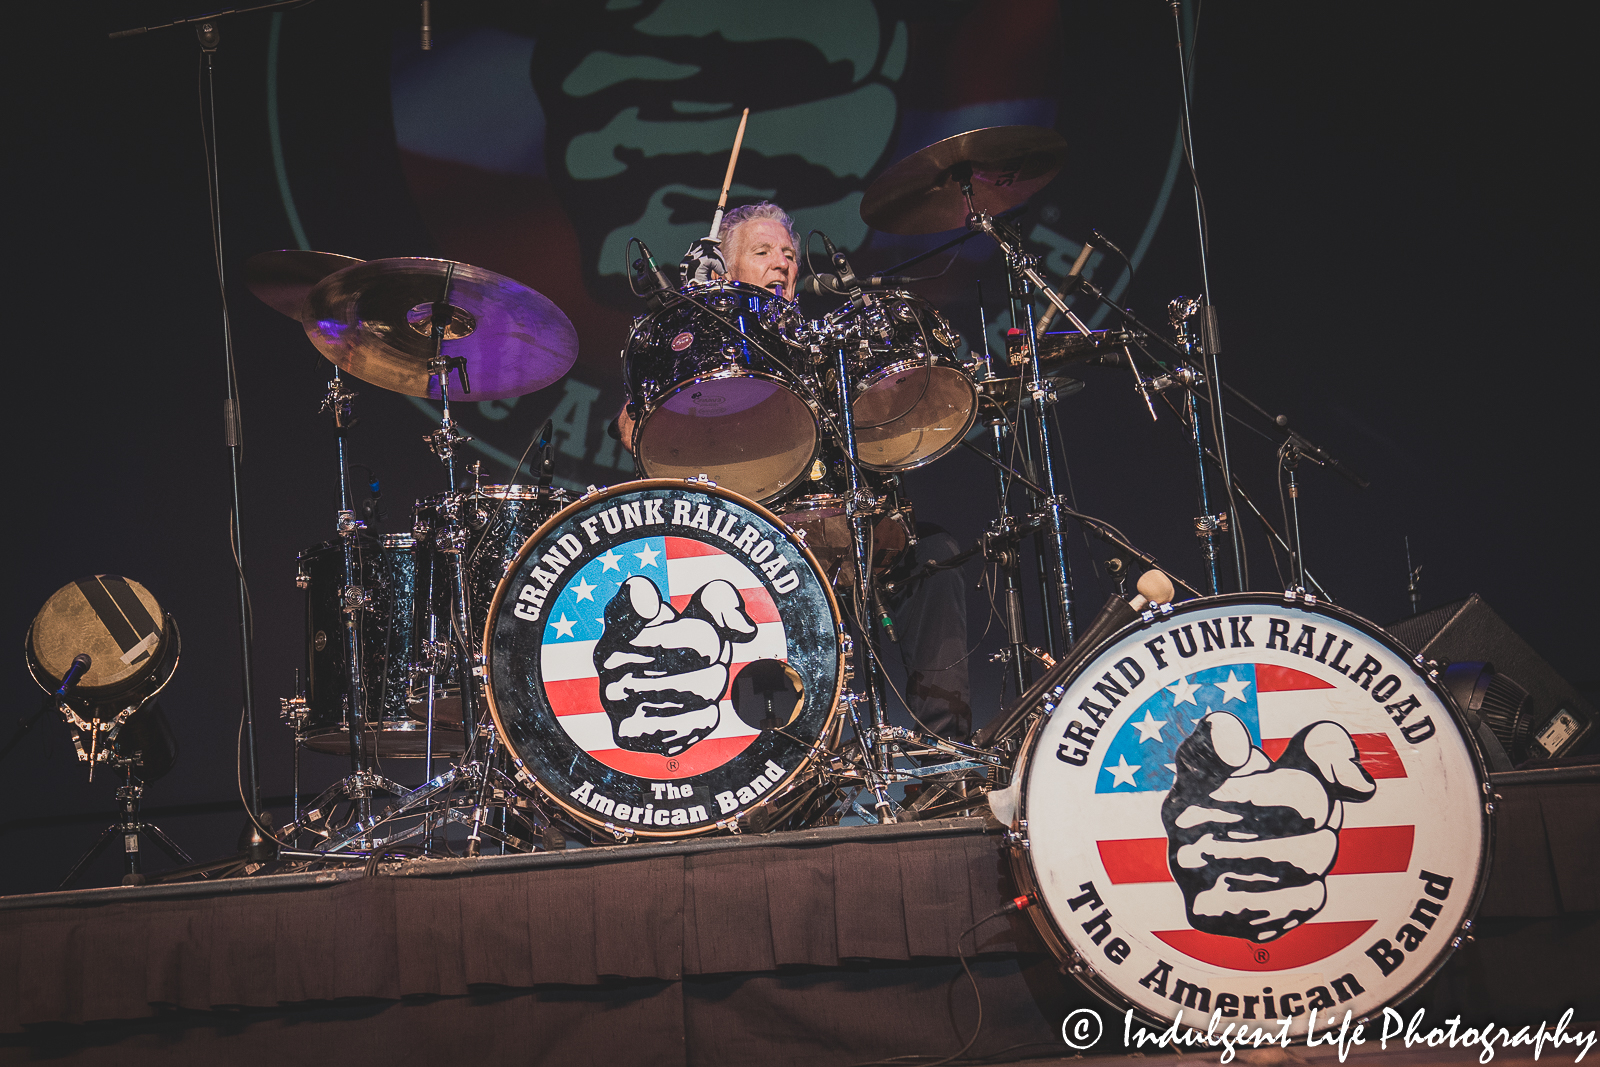 Grand Funk Railroad founding member, lead singer and drummer Don Brewer performing live at Ameristar Casino Hotel Kansas City on September 18, 2021.